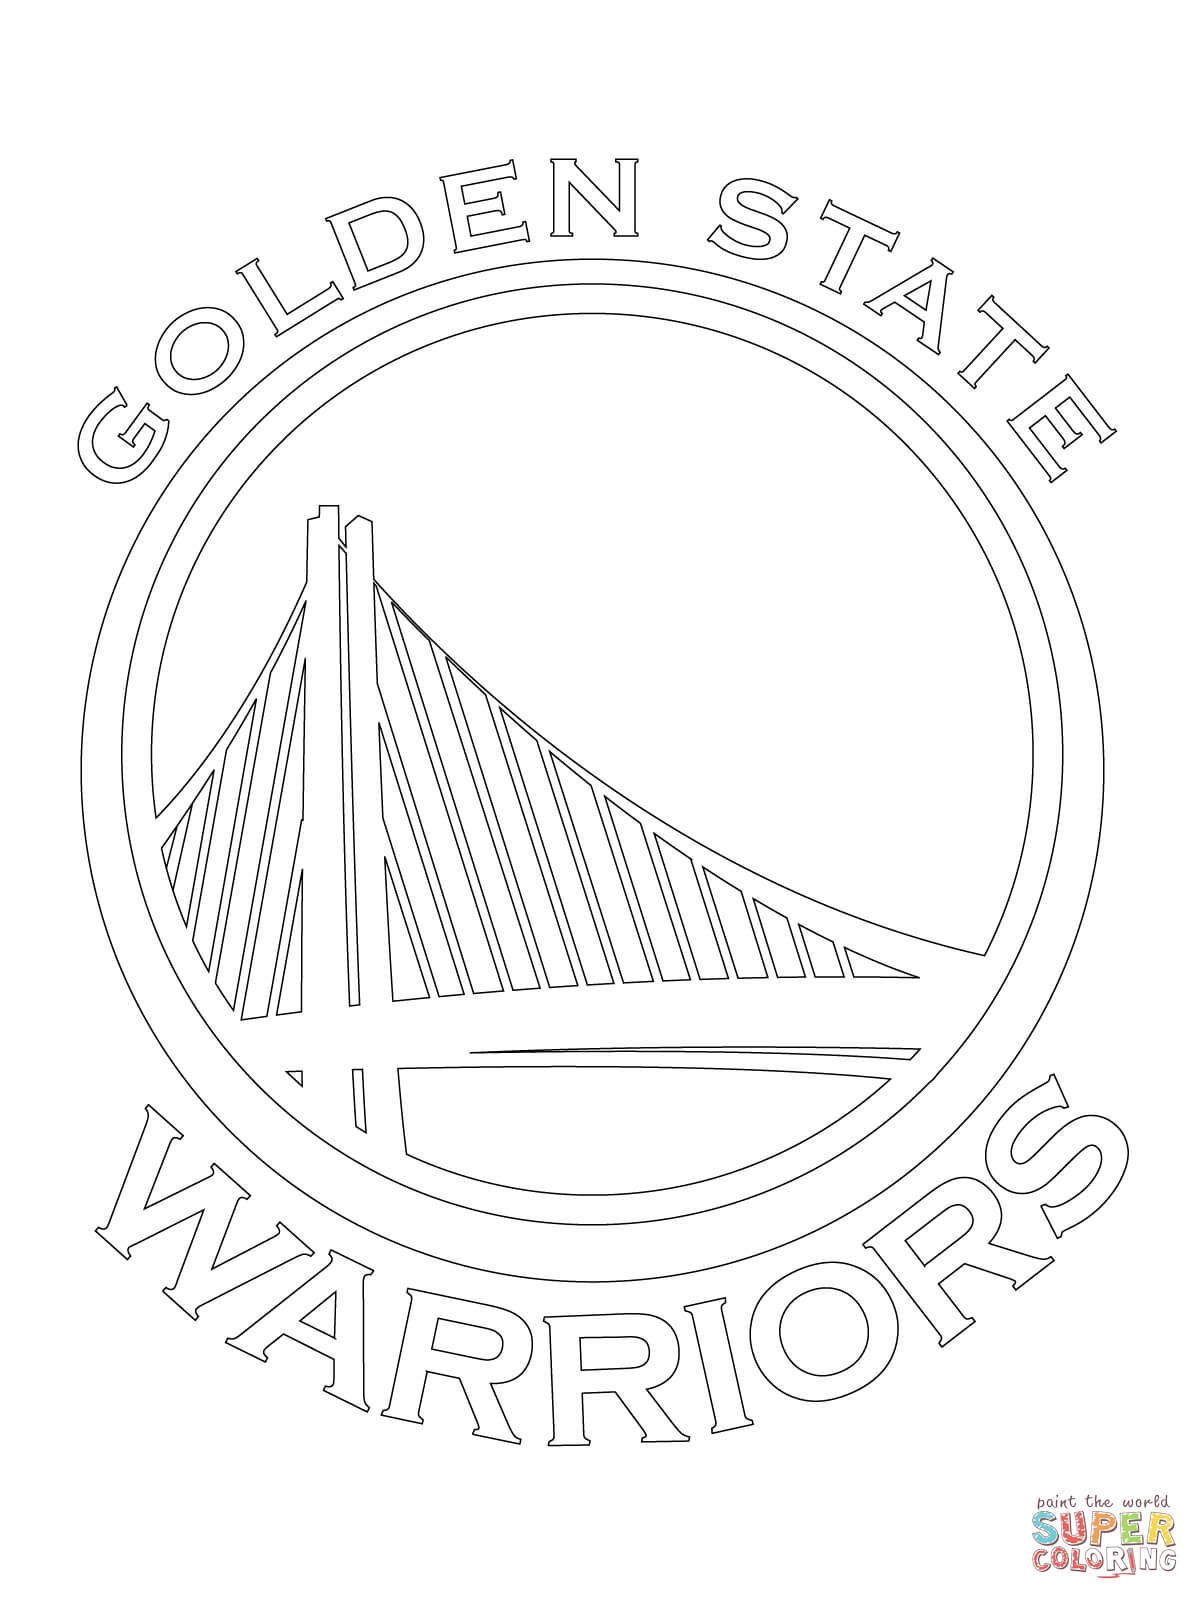 Lakers Logo Coloring Pages at GetColorings.com | Free printable